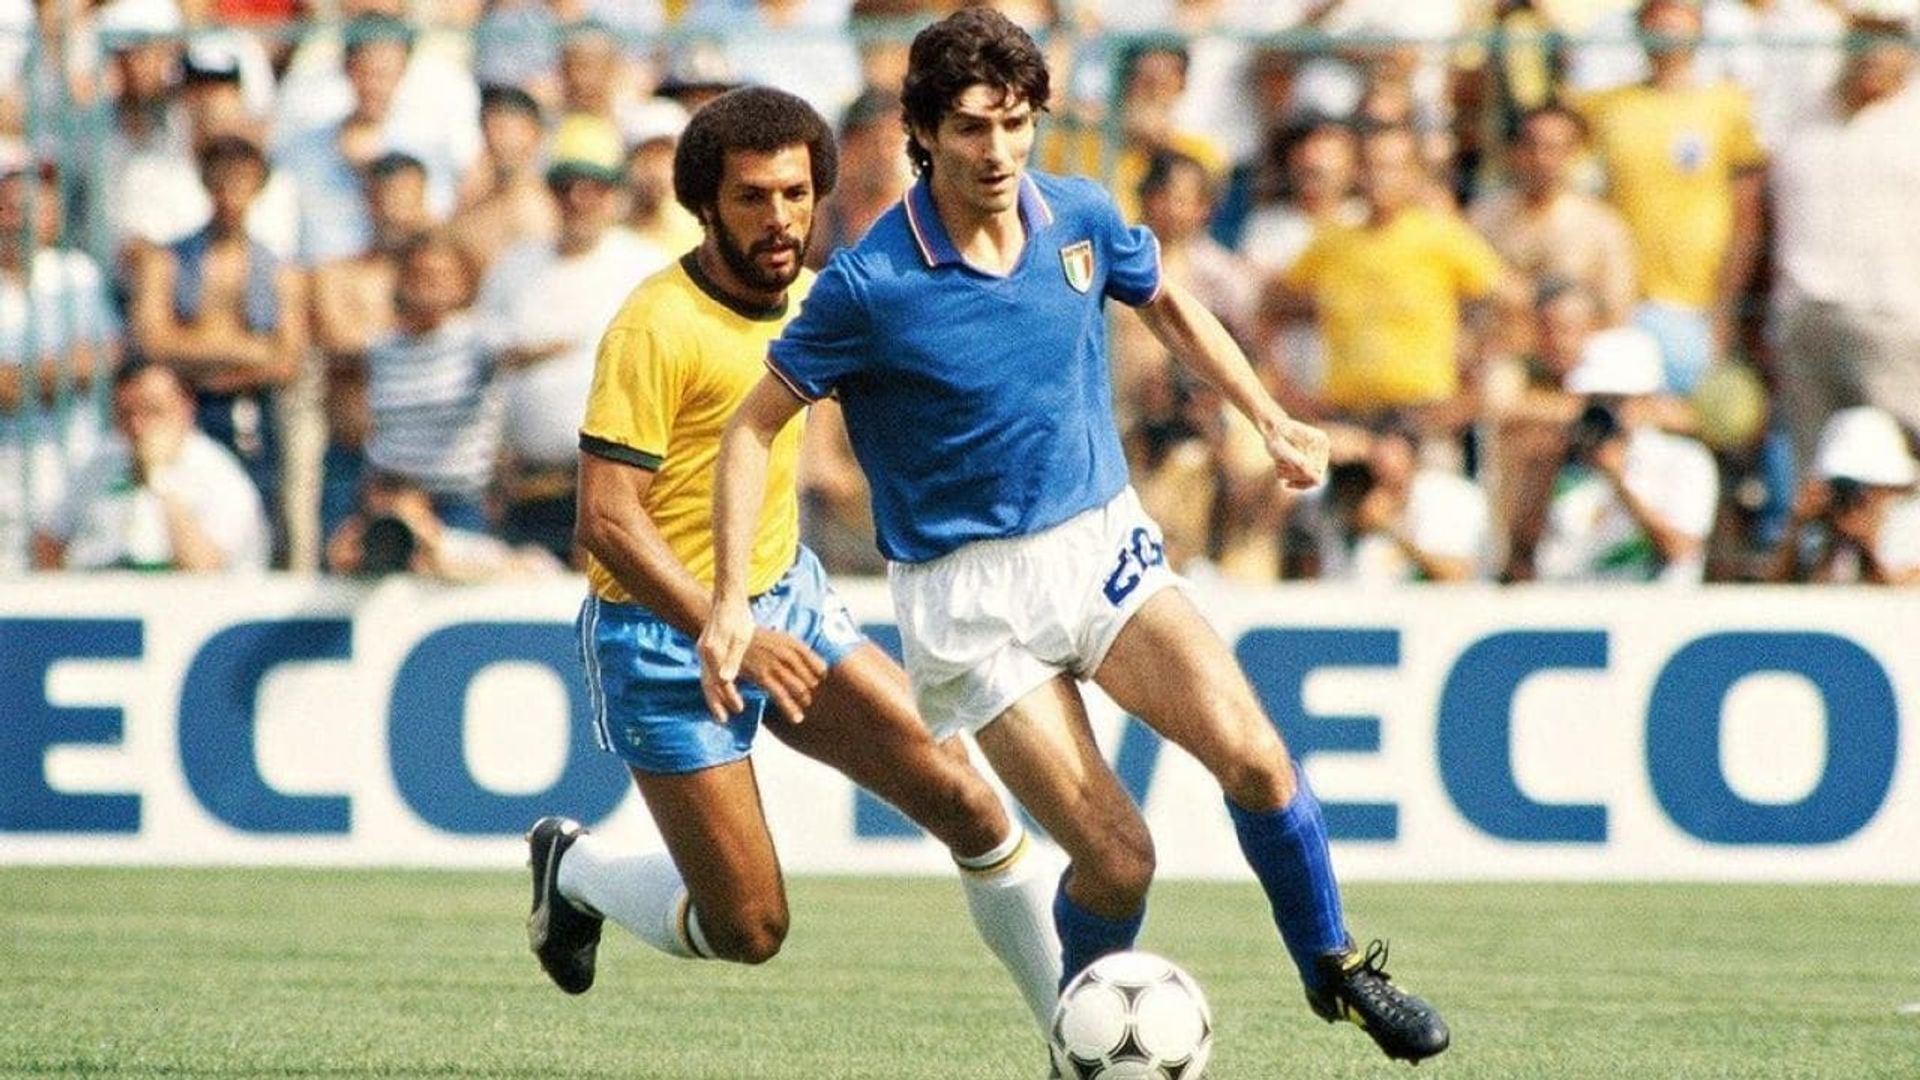 Paolo Rossi, The Heart of a Champion background